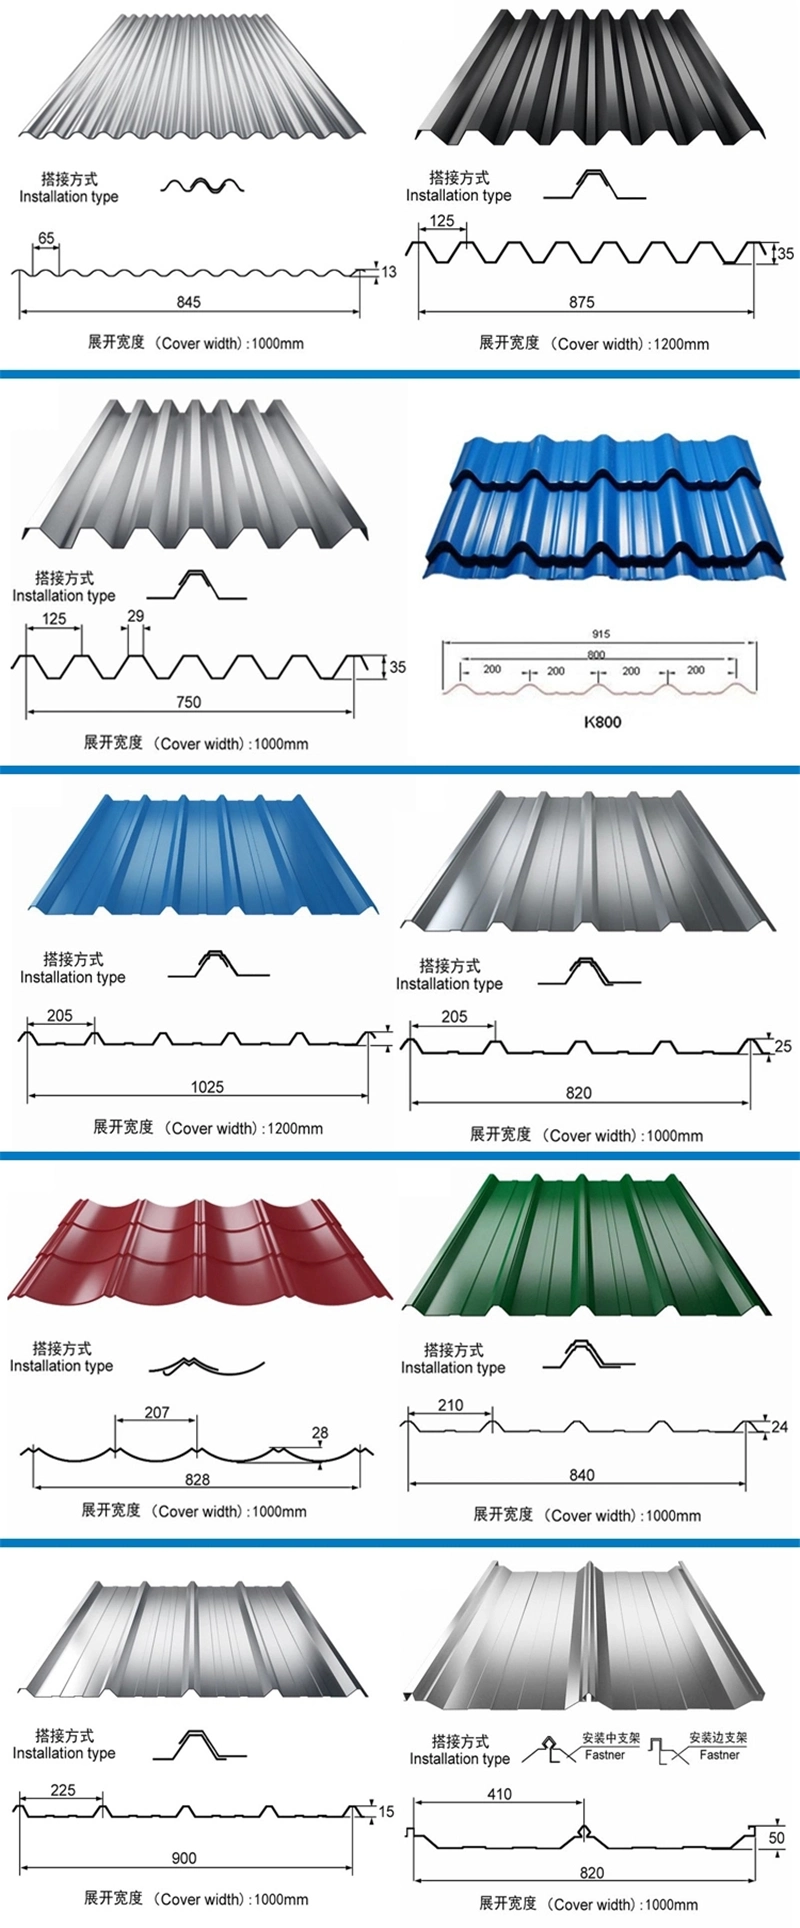 Prepainted Color Coated Corrugated Galvanized Steel Metal Roofing Sheet Prices